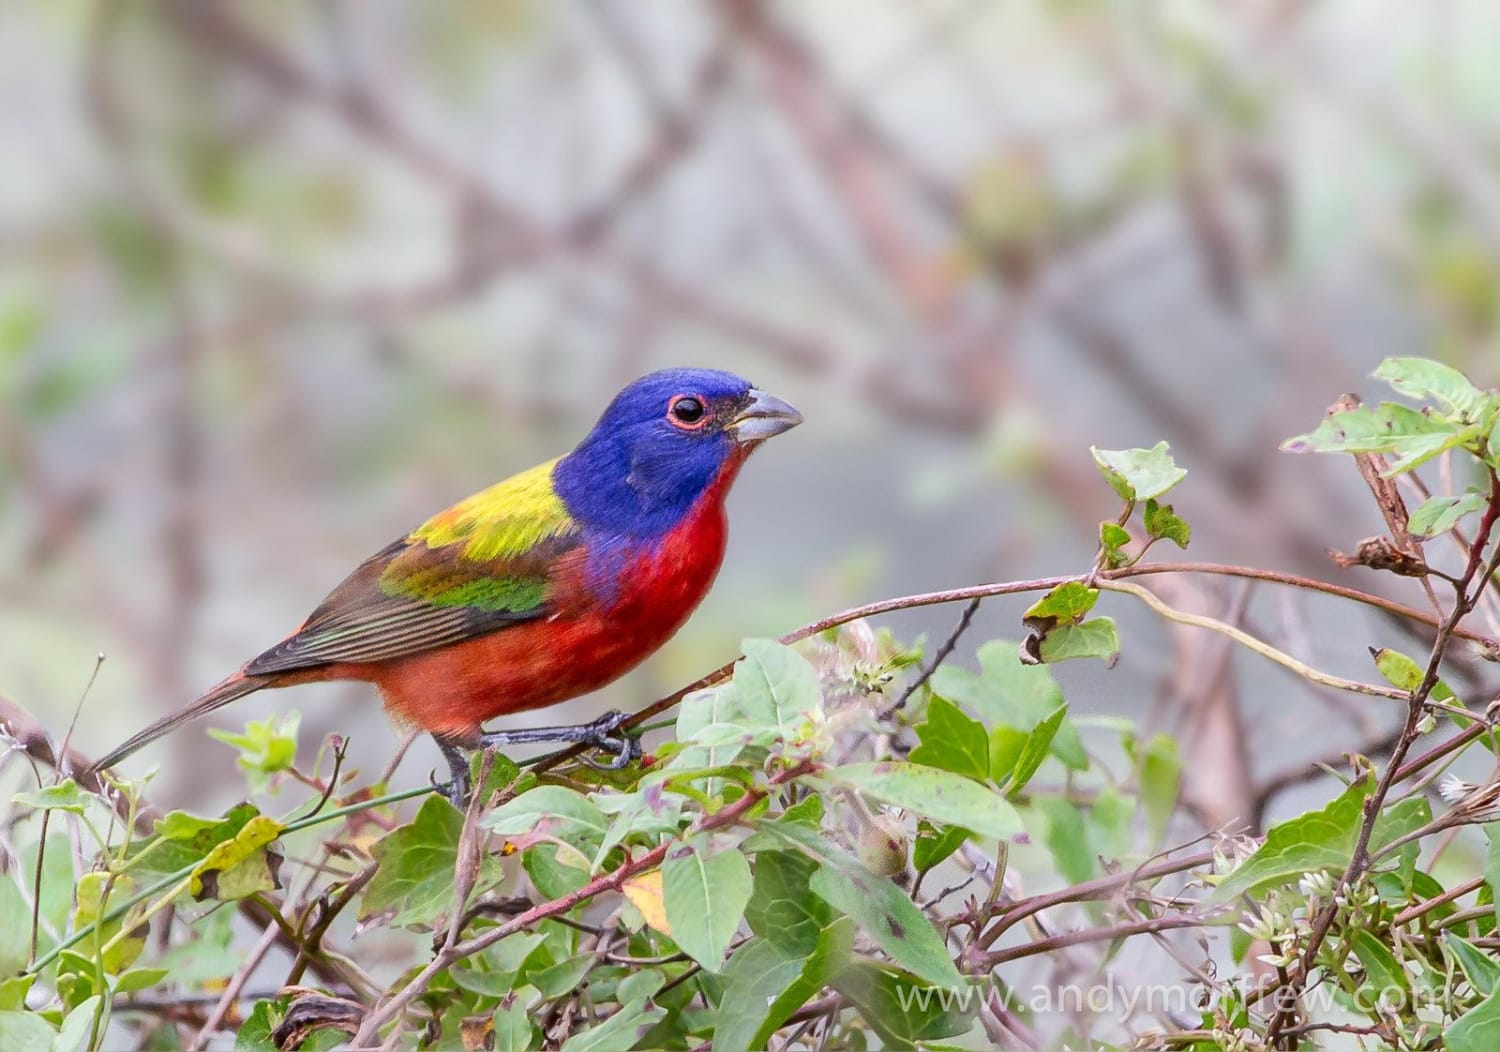 A Visit From a Dazzling Bird Drew Crowds of People Into a Maryland Park